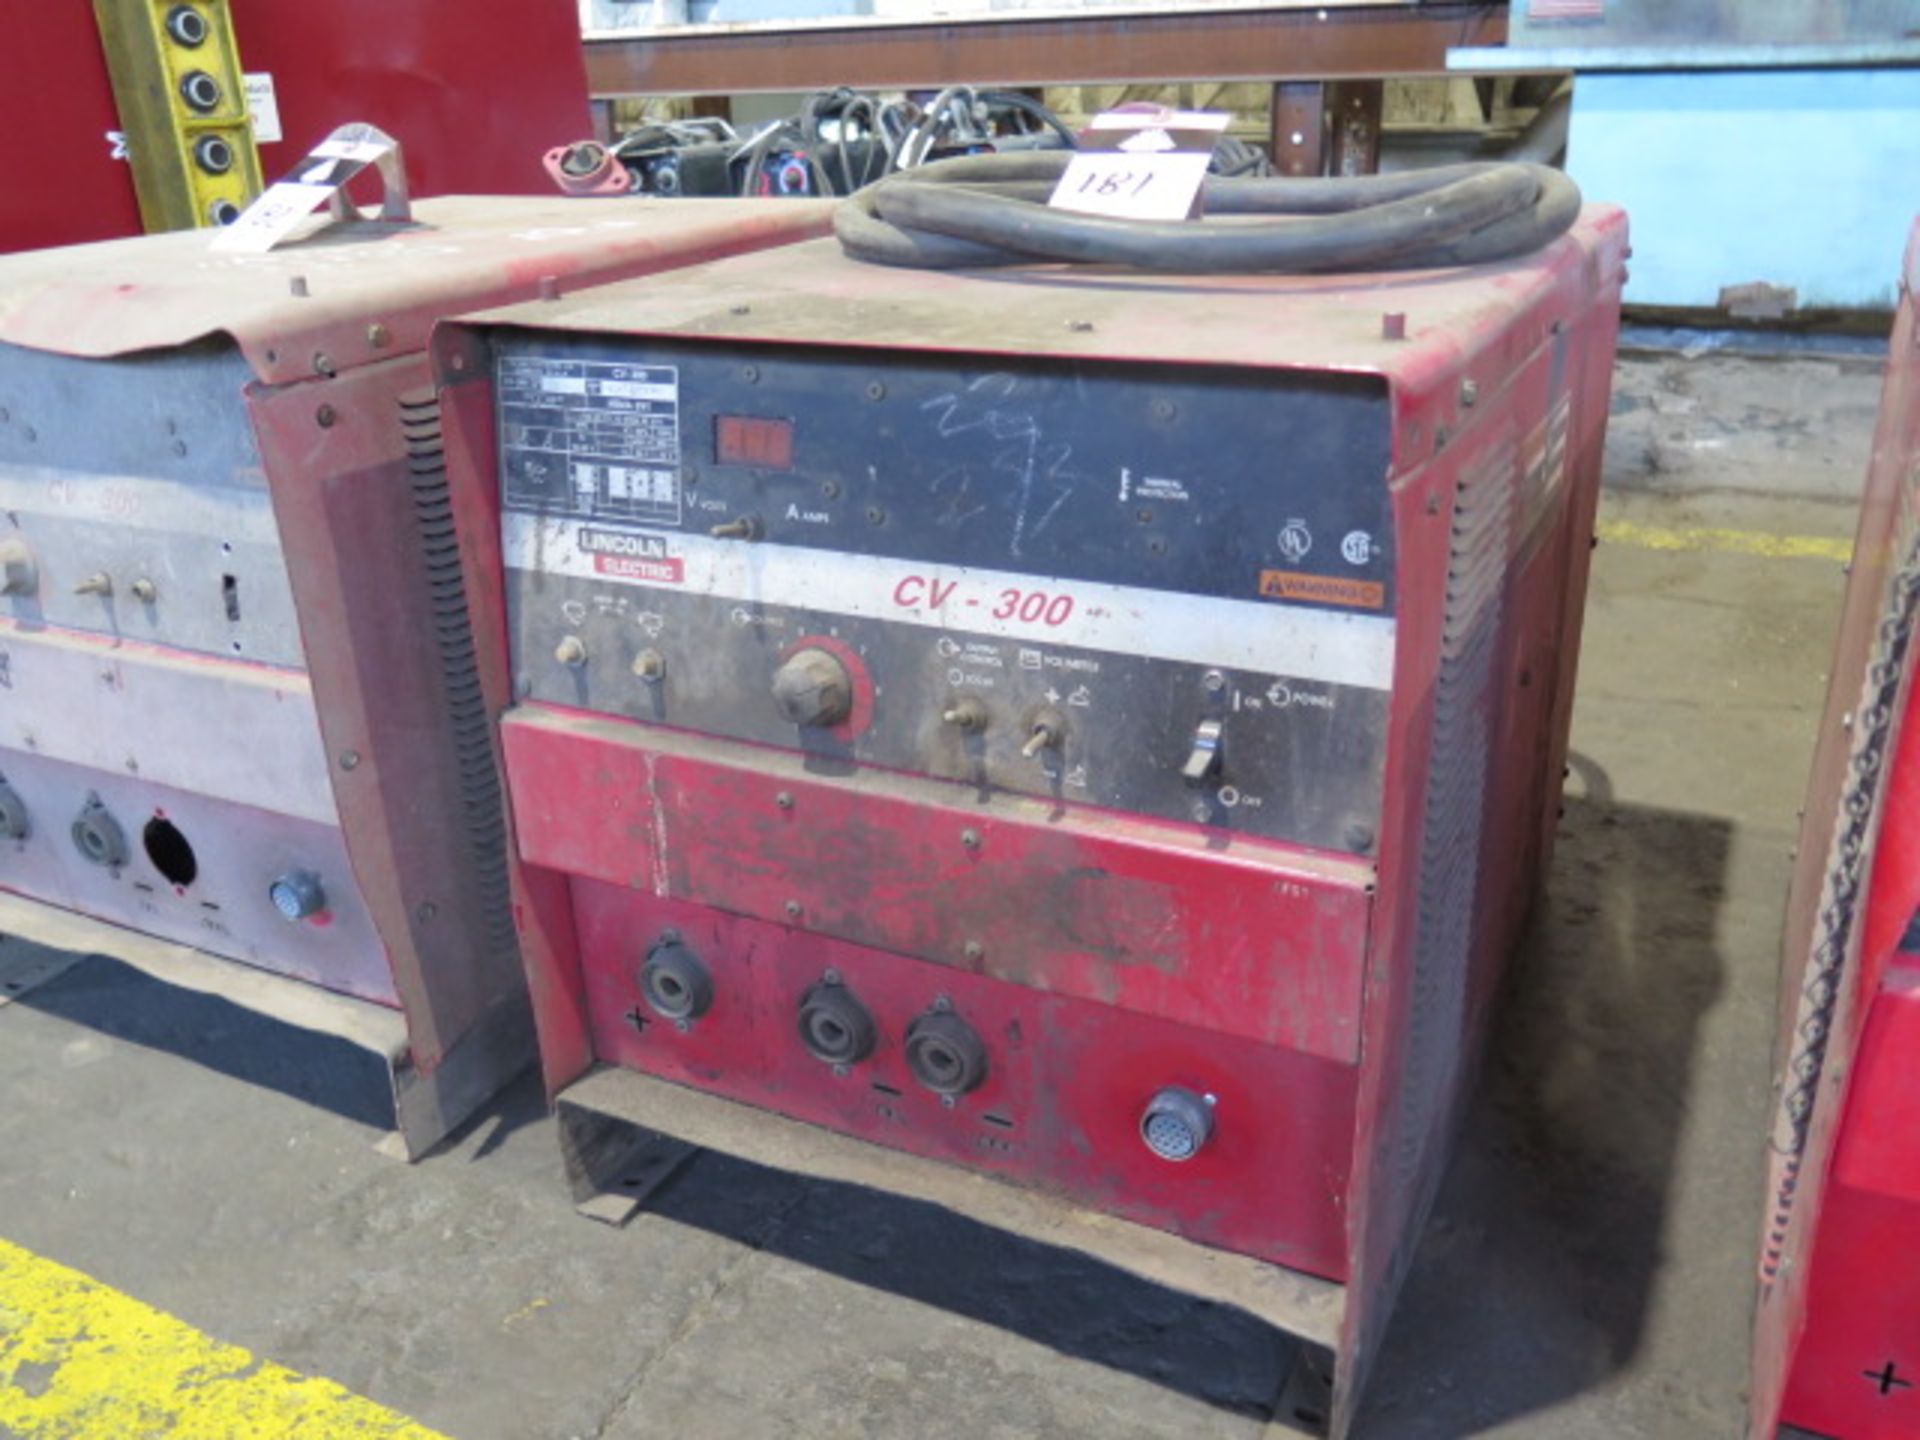 Lincoln CV-305 Arc Welding Power Source (NO CABLES) (SOLD AS-IS - NO WARRANTY)